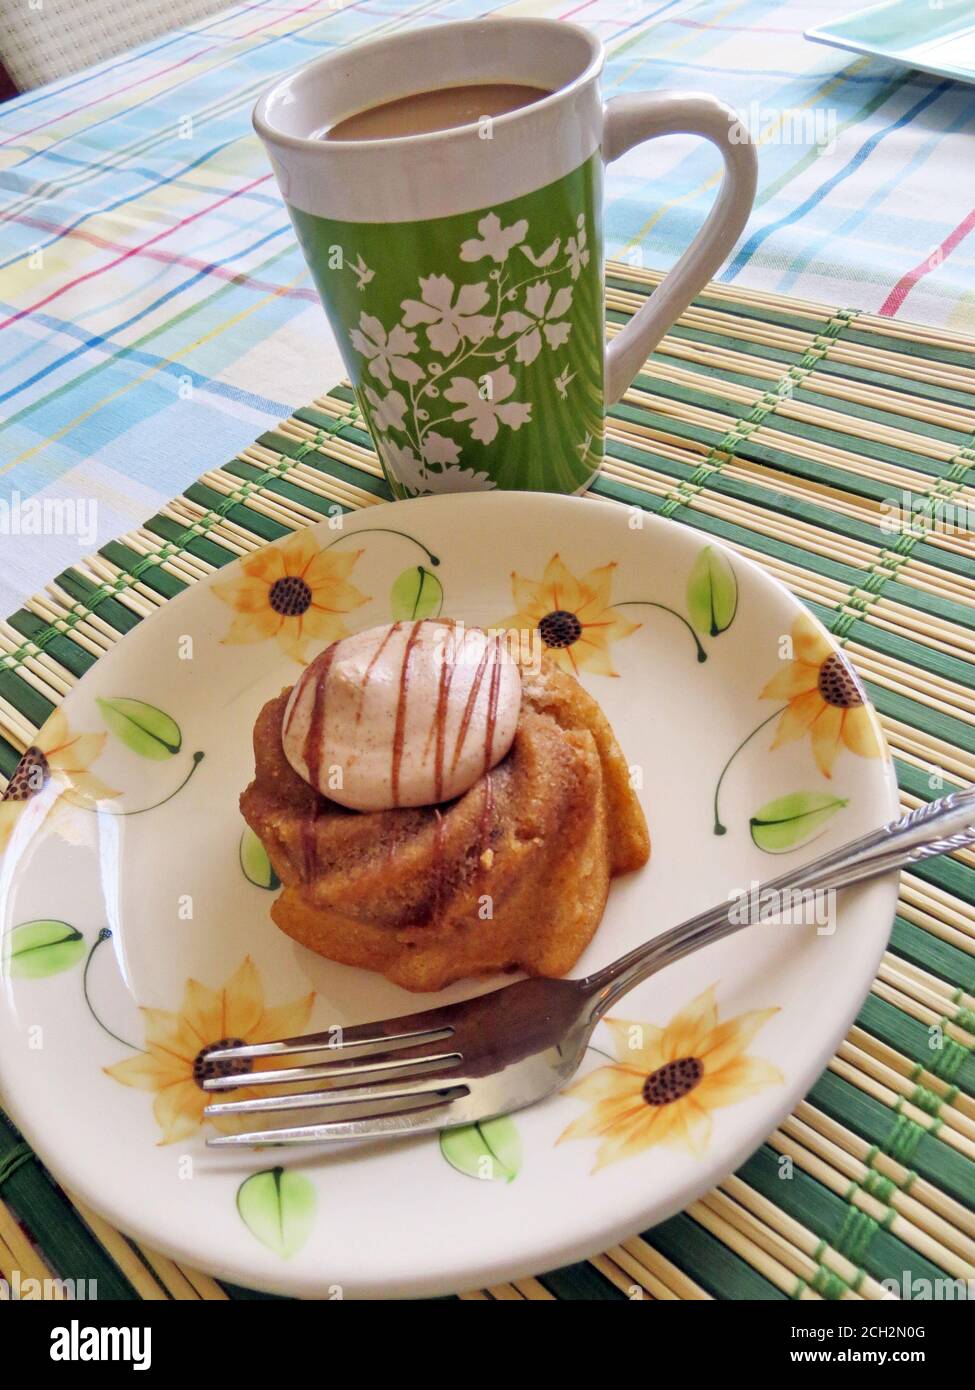 Small cake on a plate with a cup of coffee Stock Photo